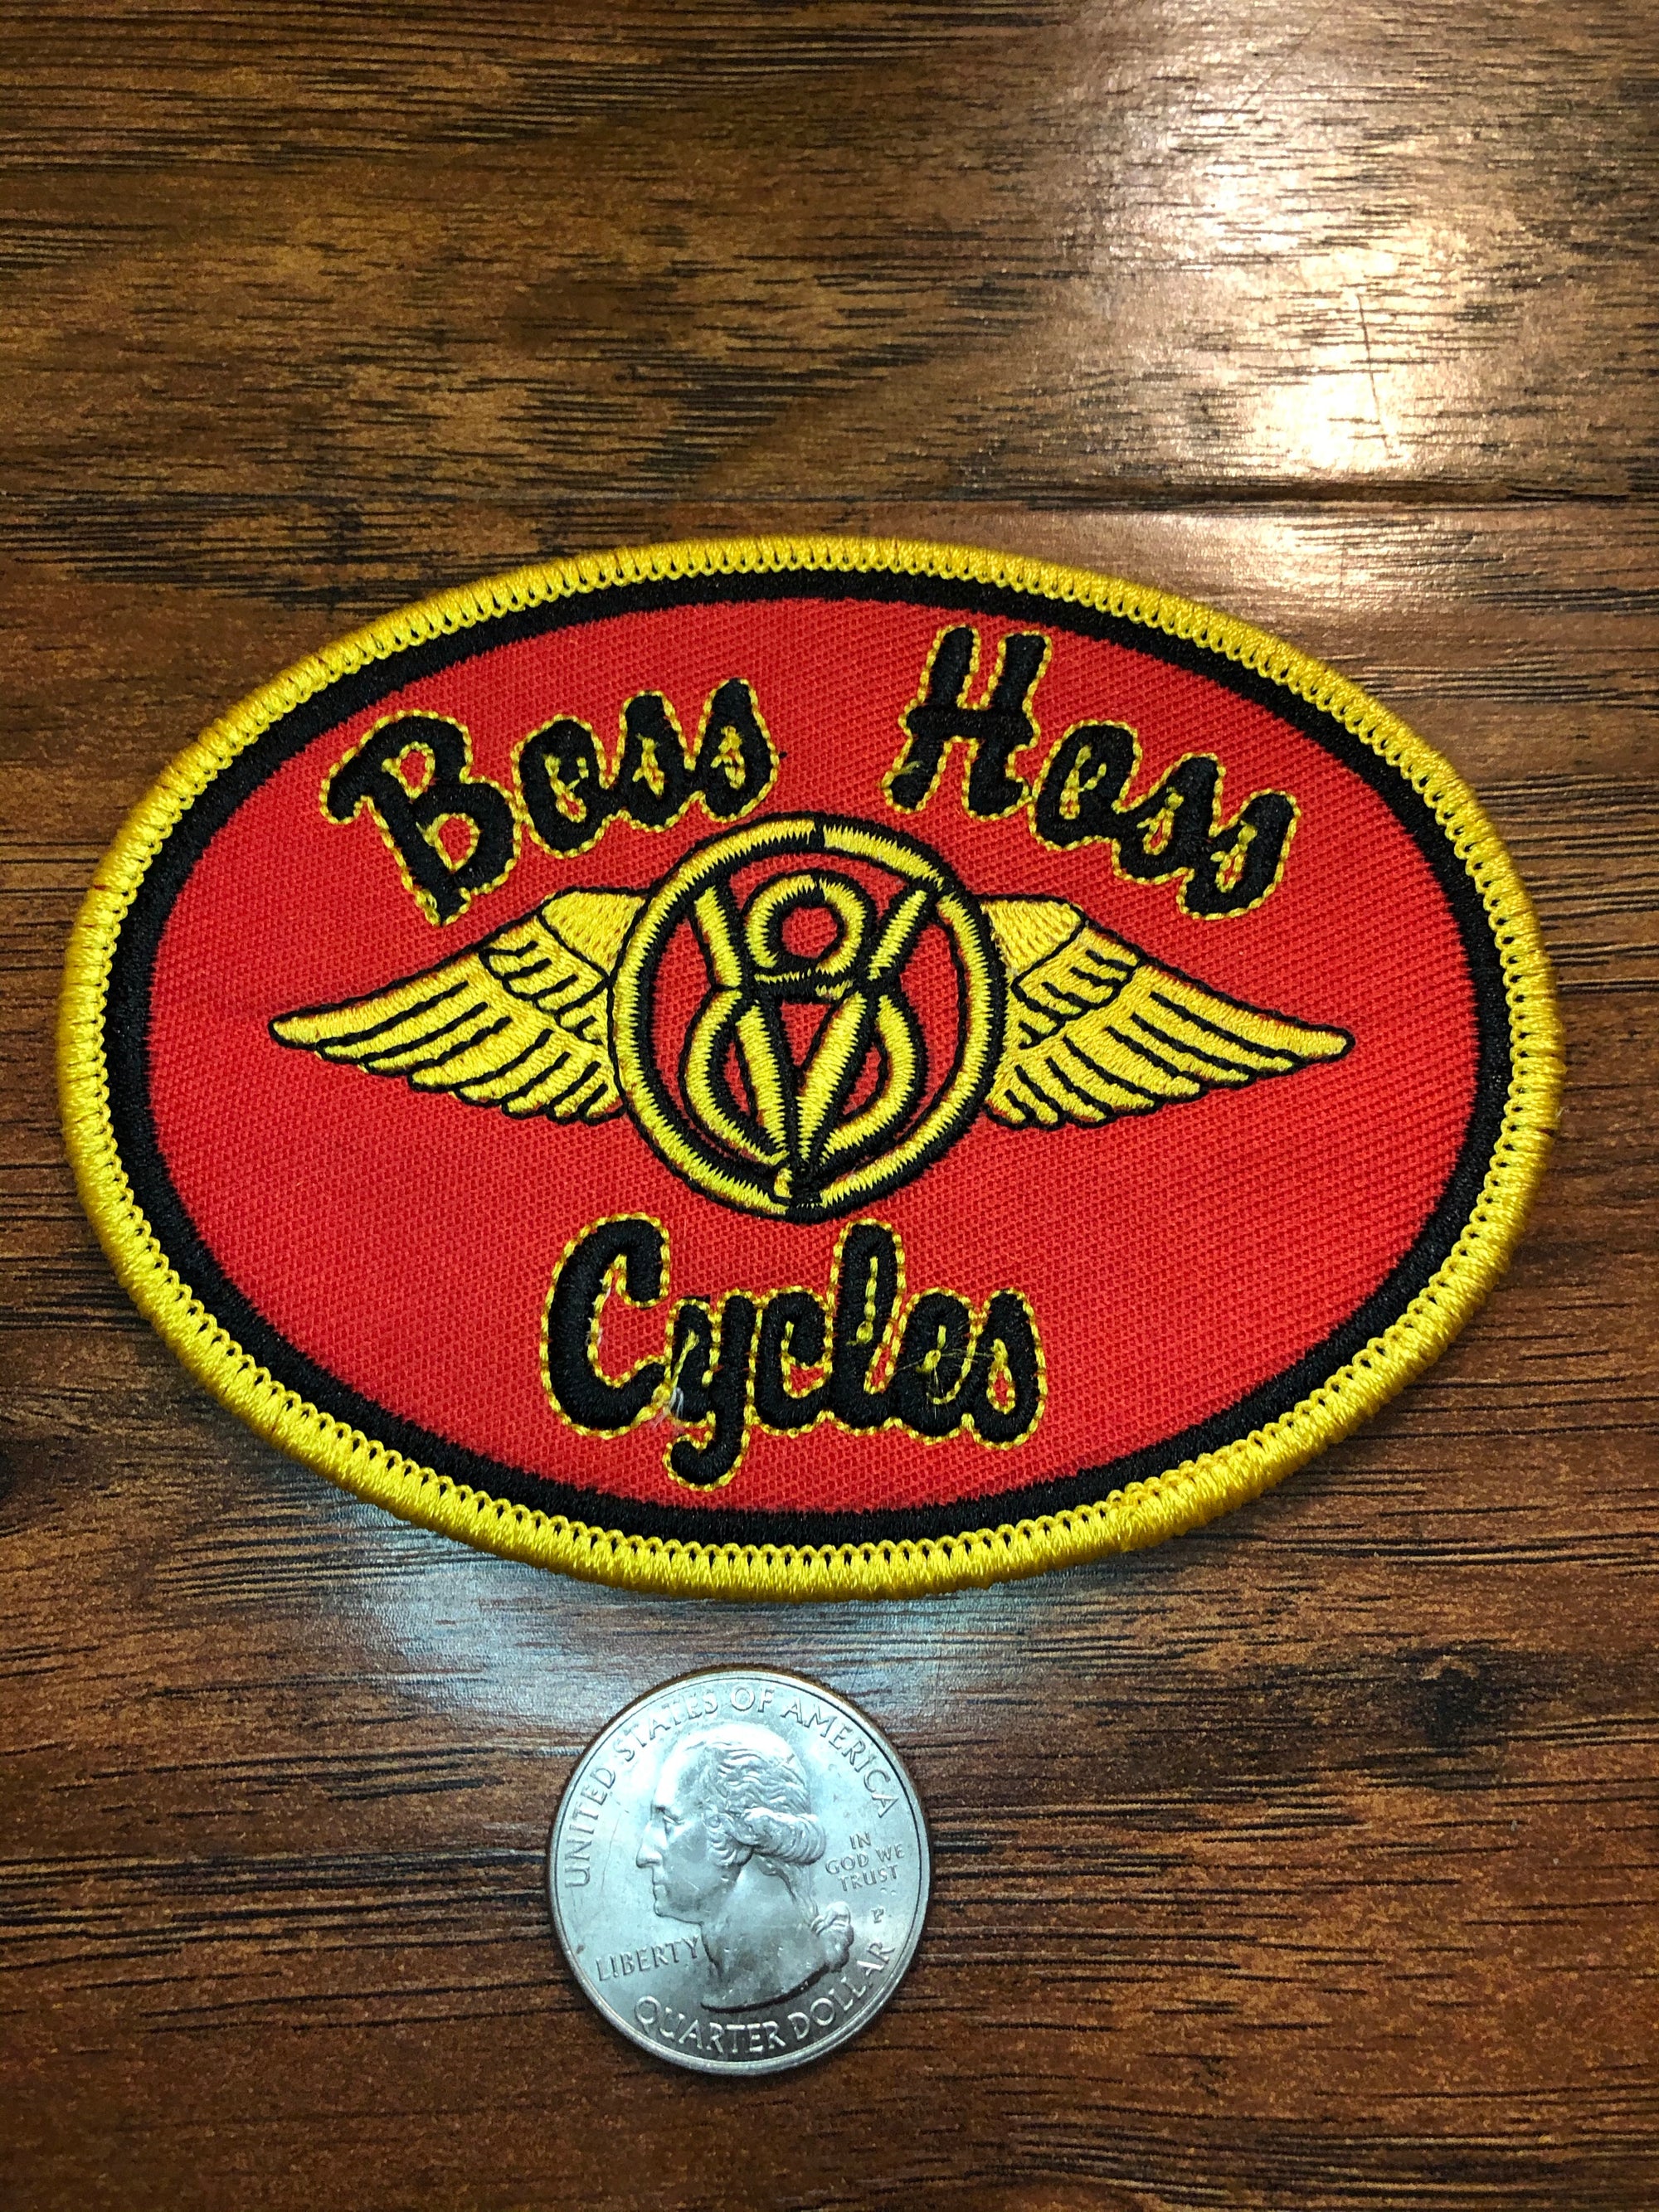 Boss Hoss Cycles, Motorcycle, Bikes